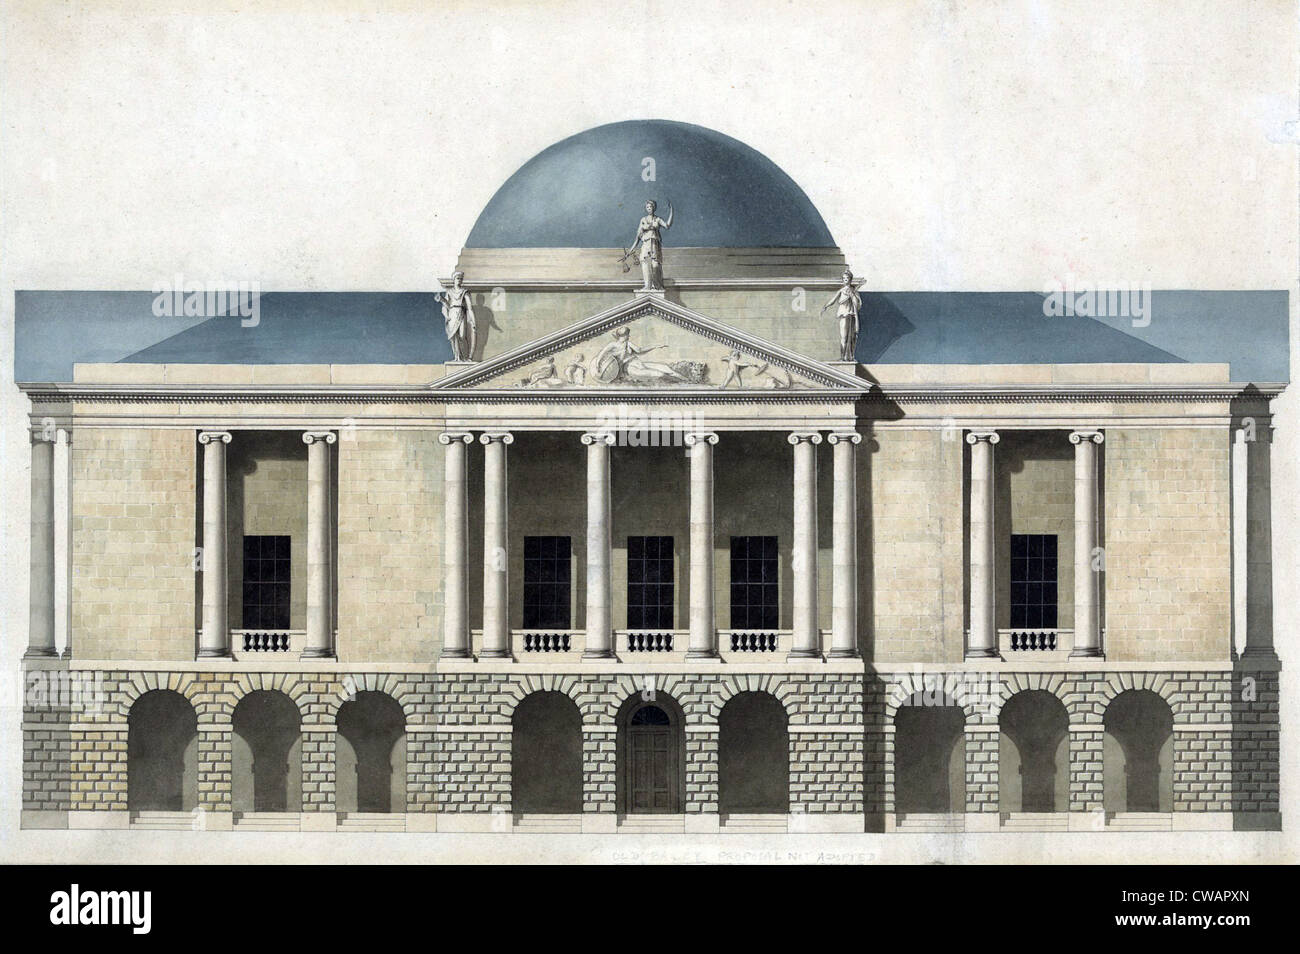 John Nash's (1752-1835), building design for the County Hall, Stafford, England. The harmoniously proportioned classical Stock Photo